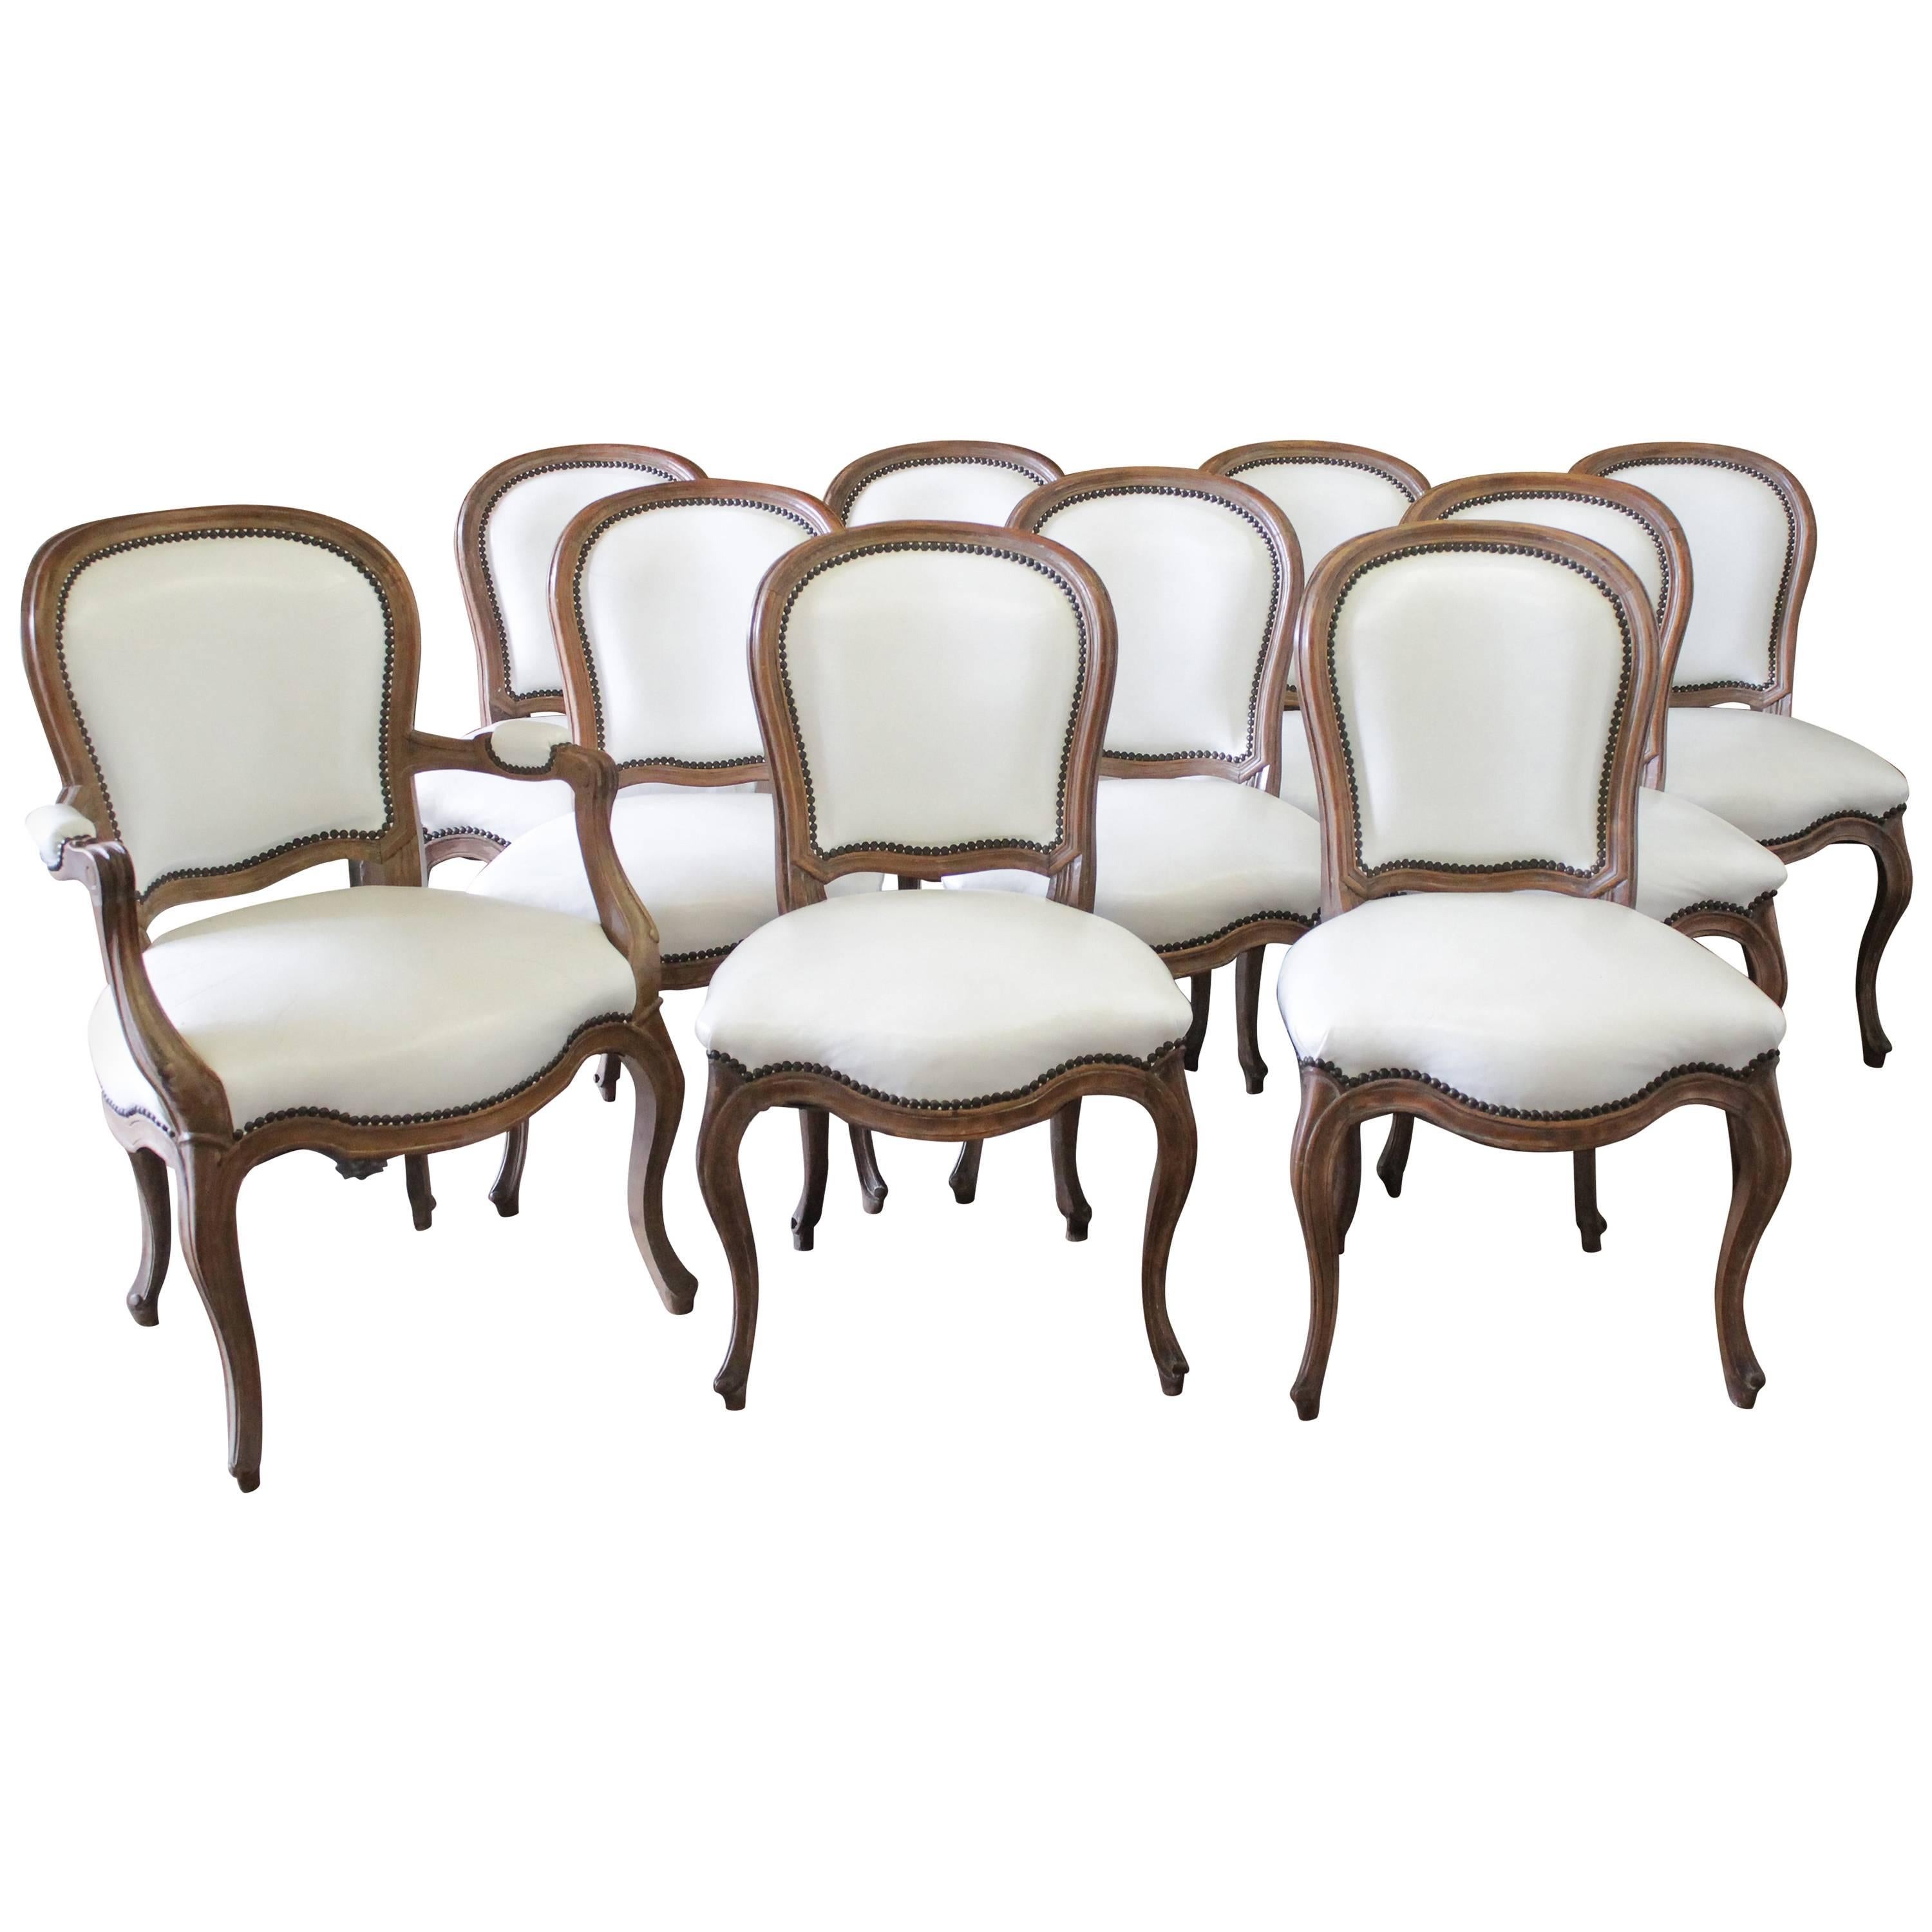 Set of Ten Early 20th Century Louis XV Style Dining Chairs in White Leather